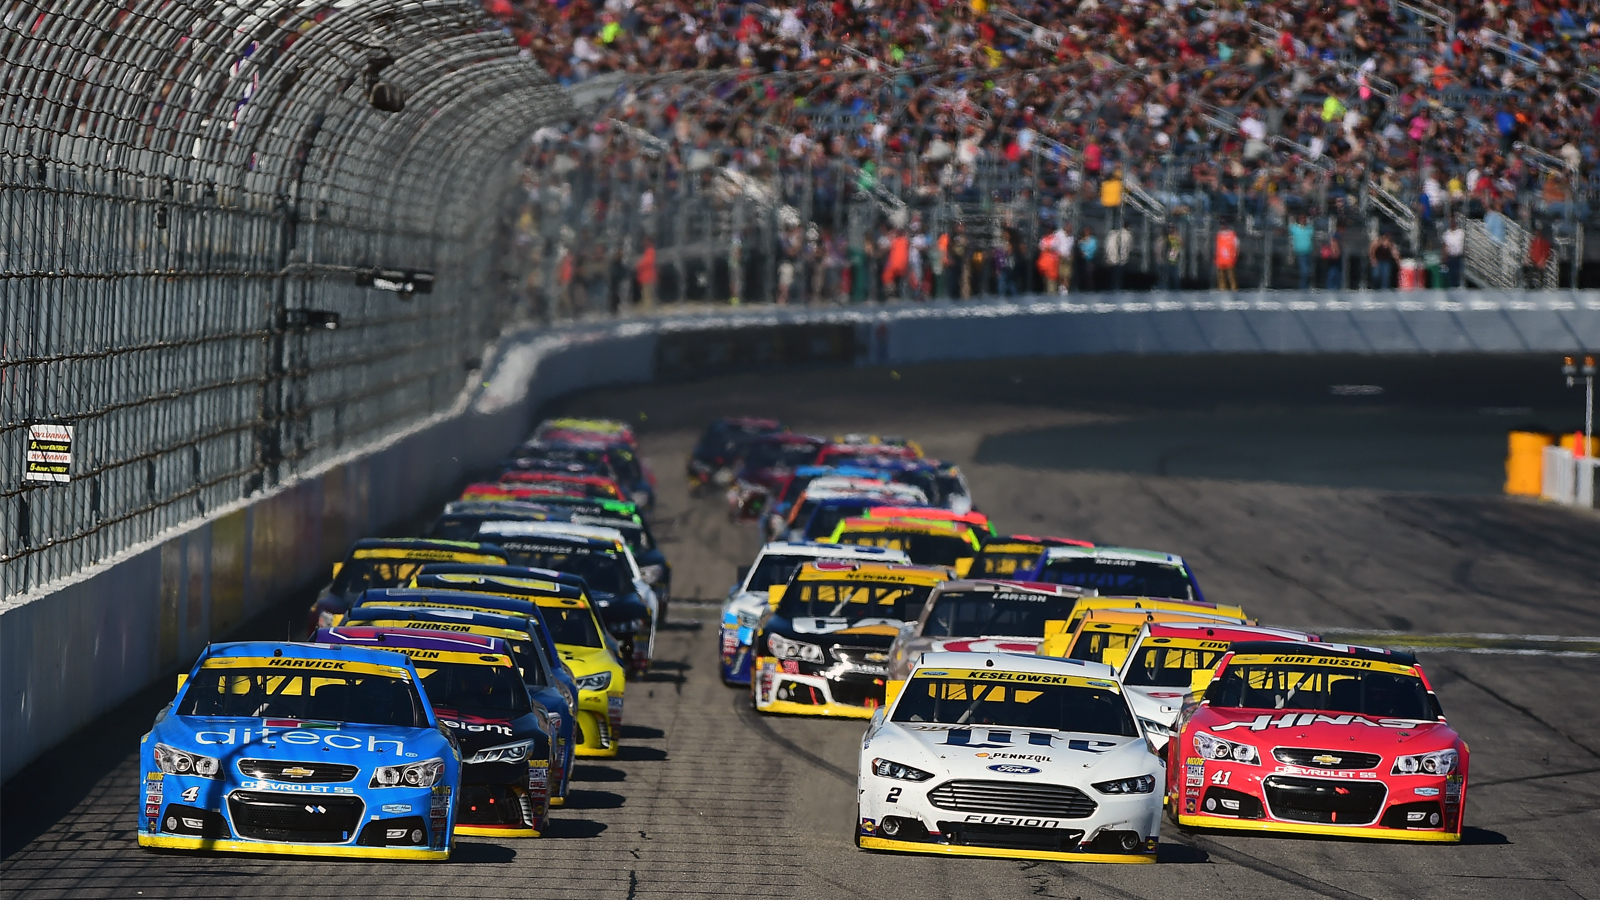 From fuel gambles to restart rules, DW breaks down the Chase race at NHMS